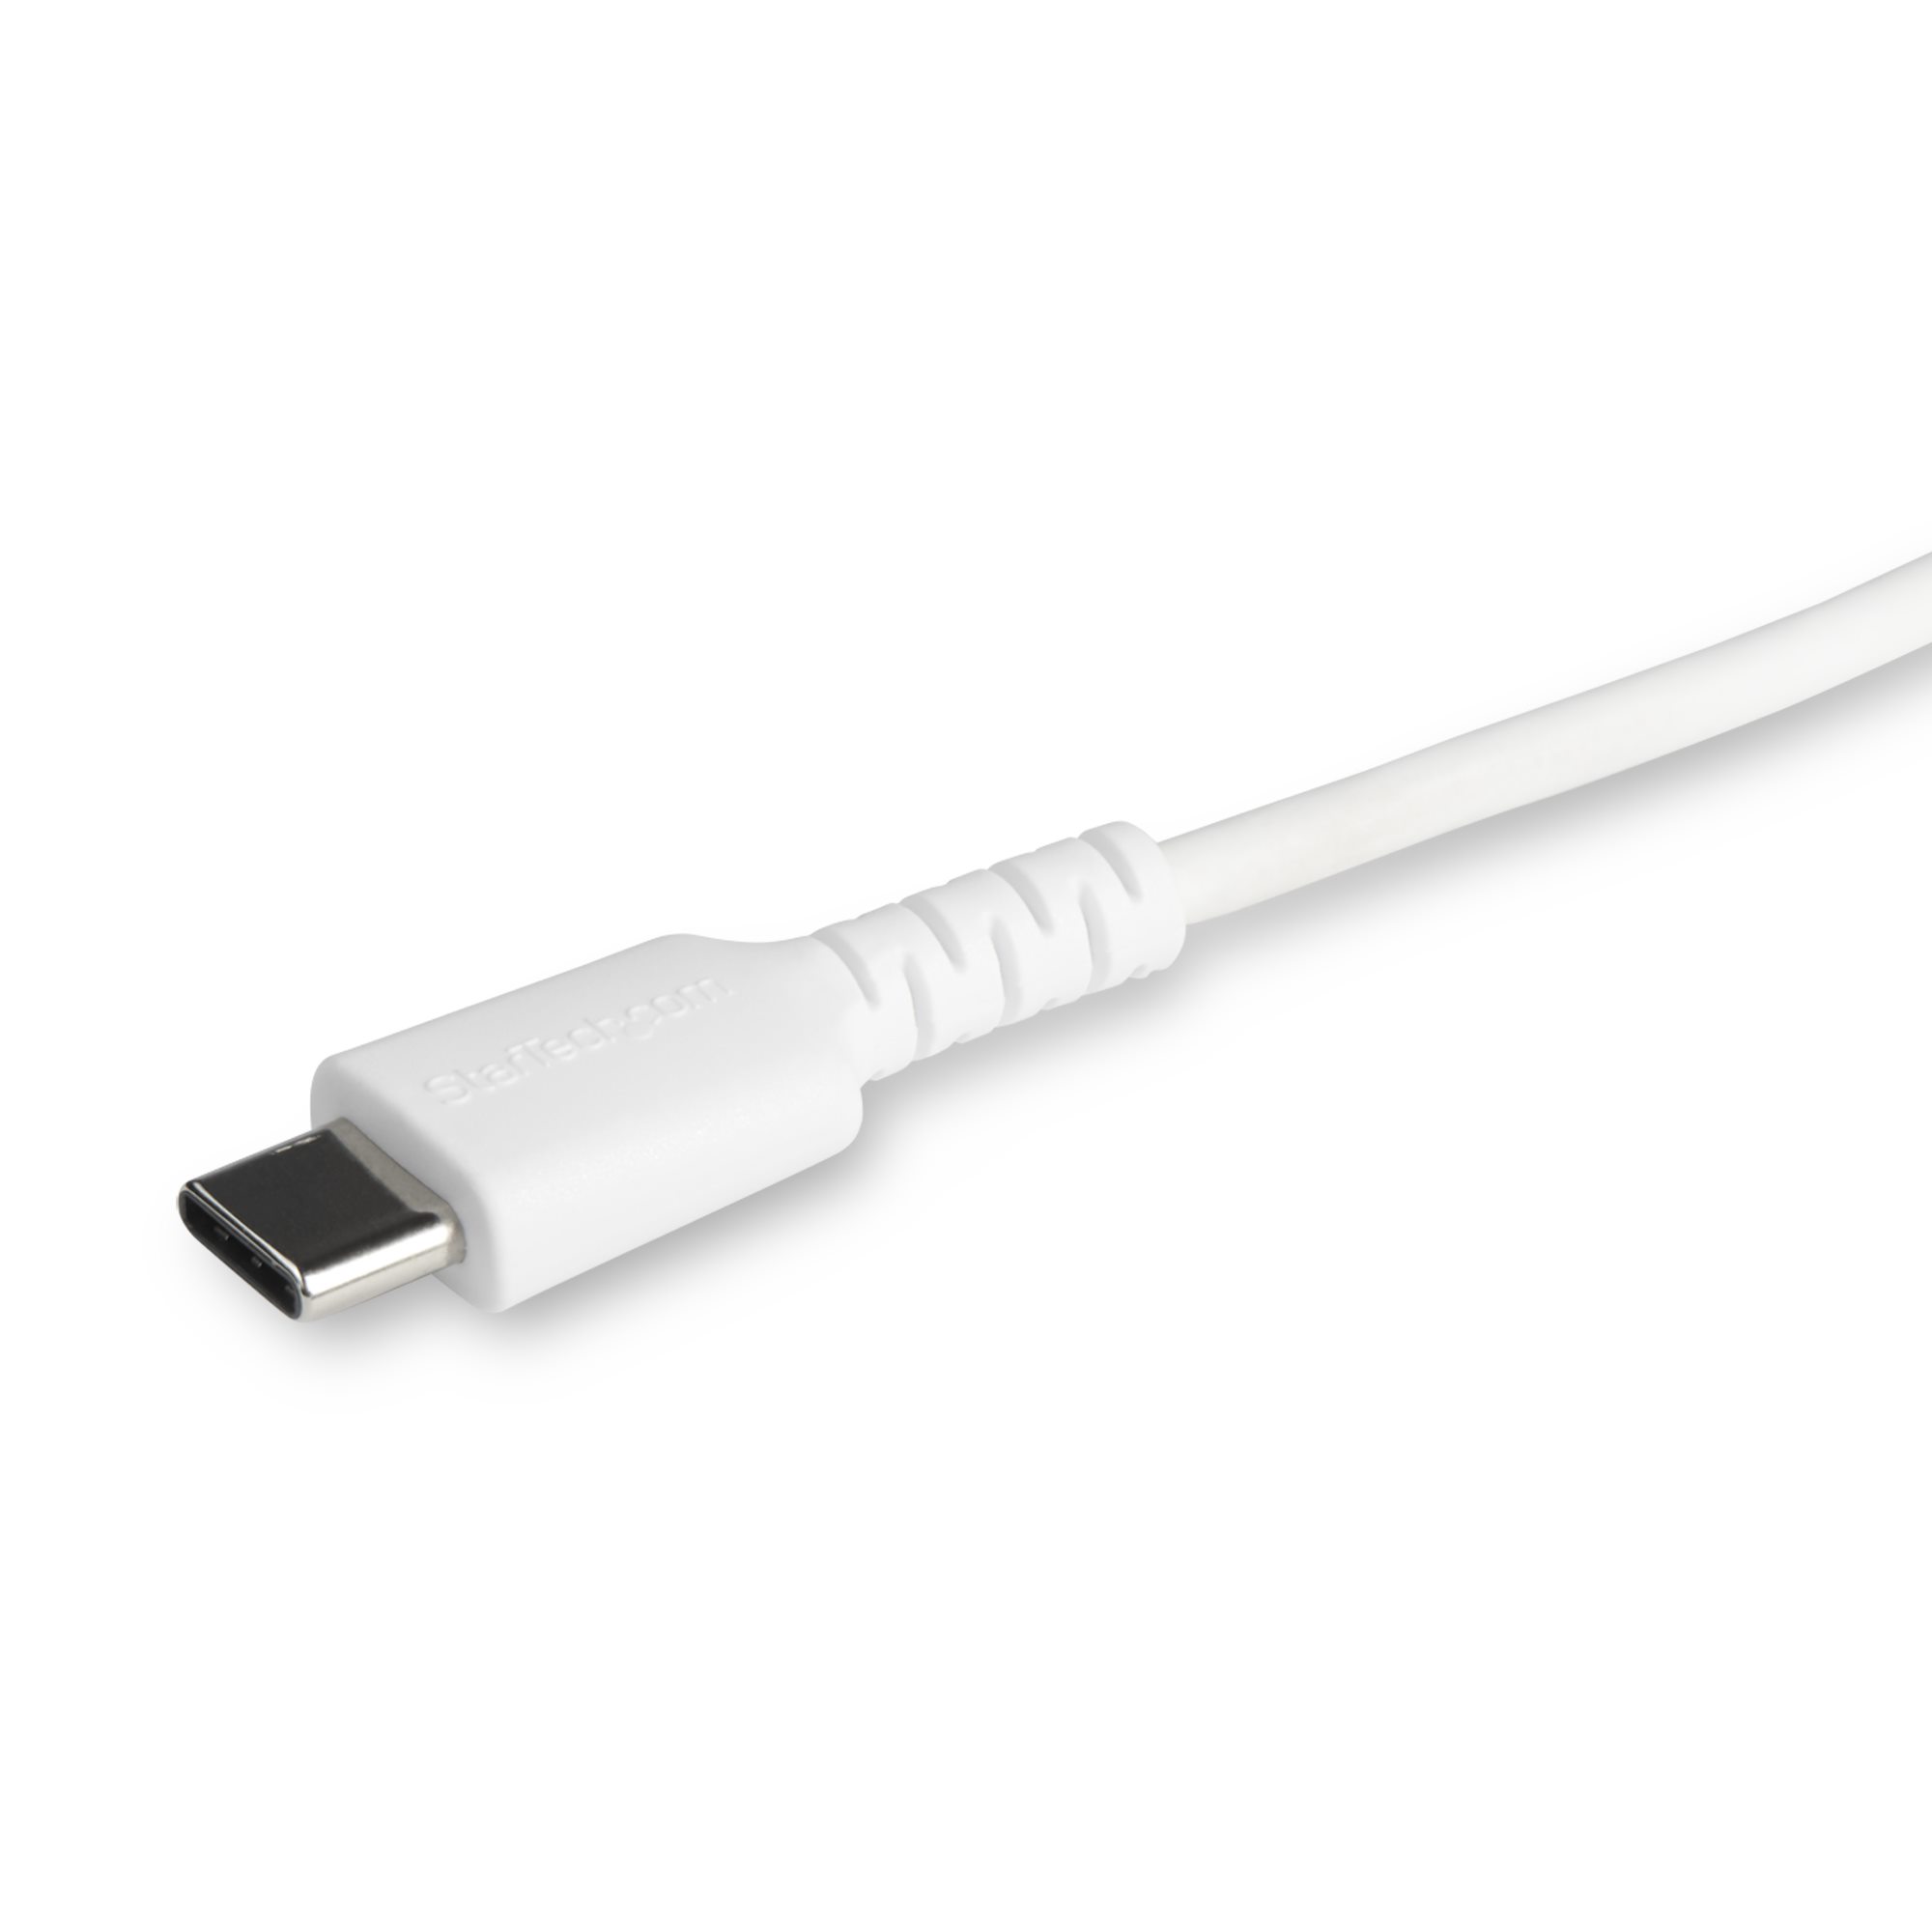 6ft/2m Durable USB-C to Lightning Cable - Lightning Cables, Cables